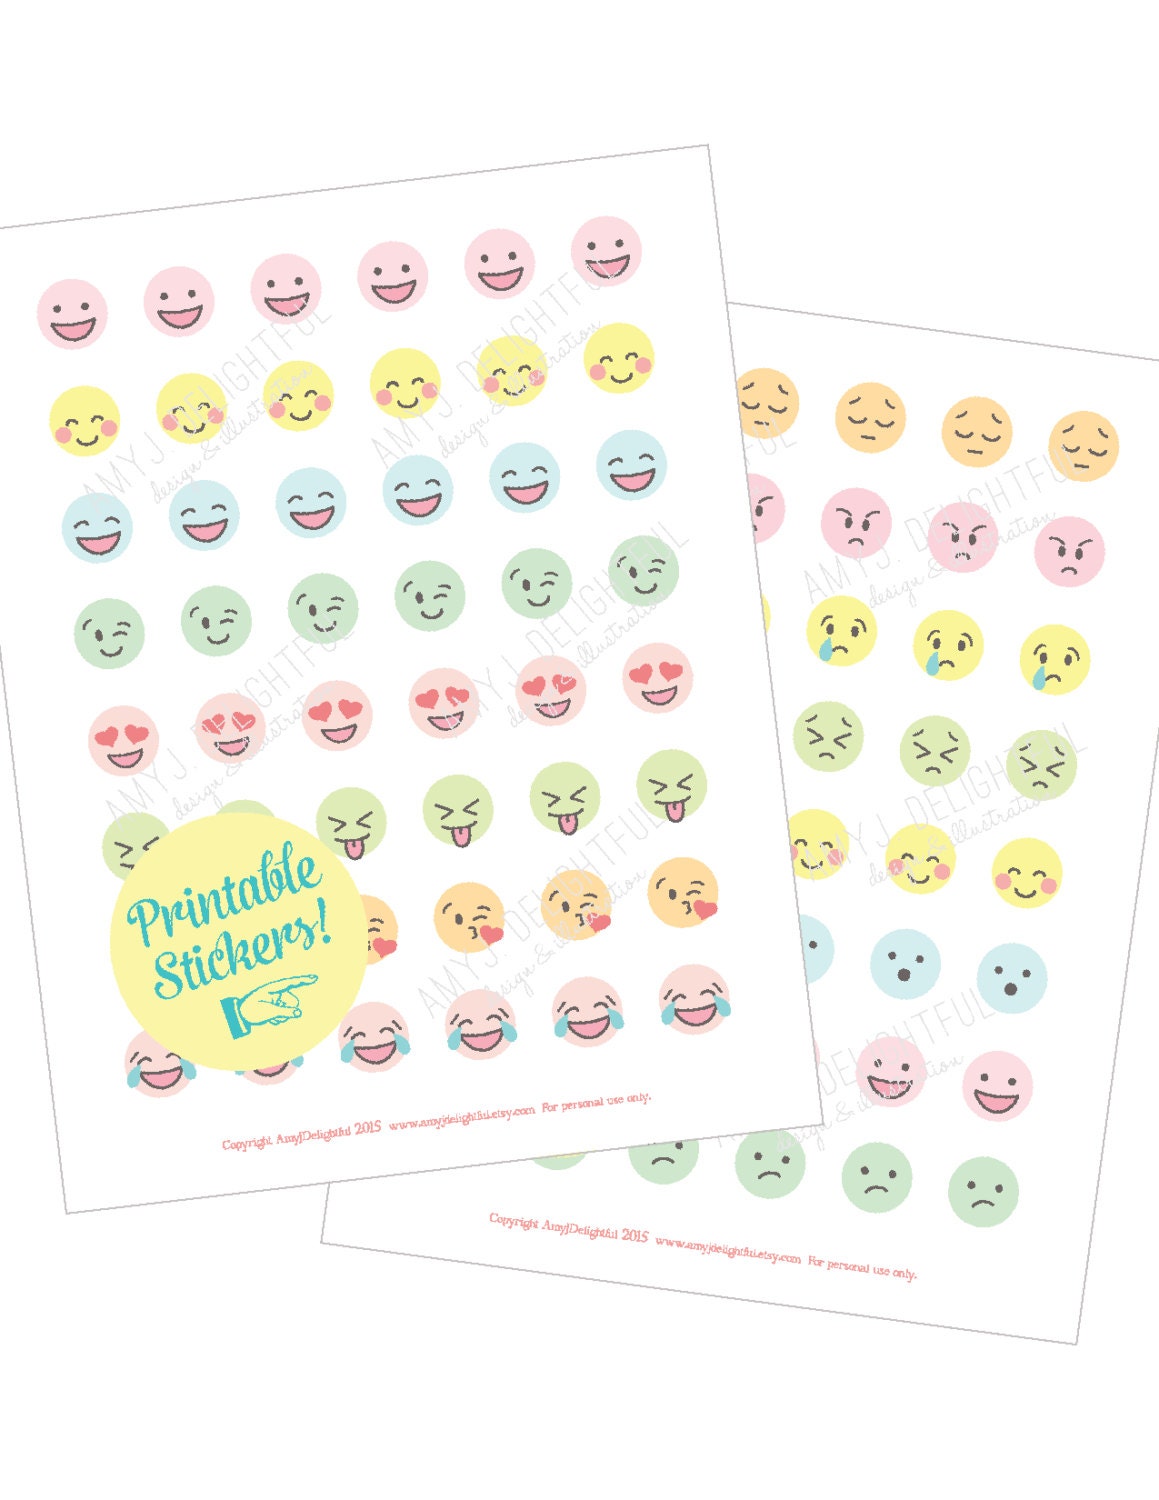 Printable Postage Stamp style stickers! - Digital File Instant  Download-state symbols, crafting, planner stickers, embellishment, hand  drawn